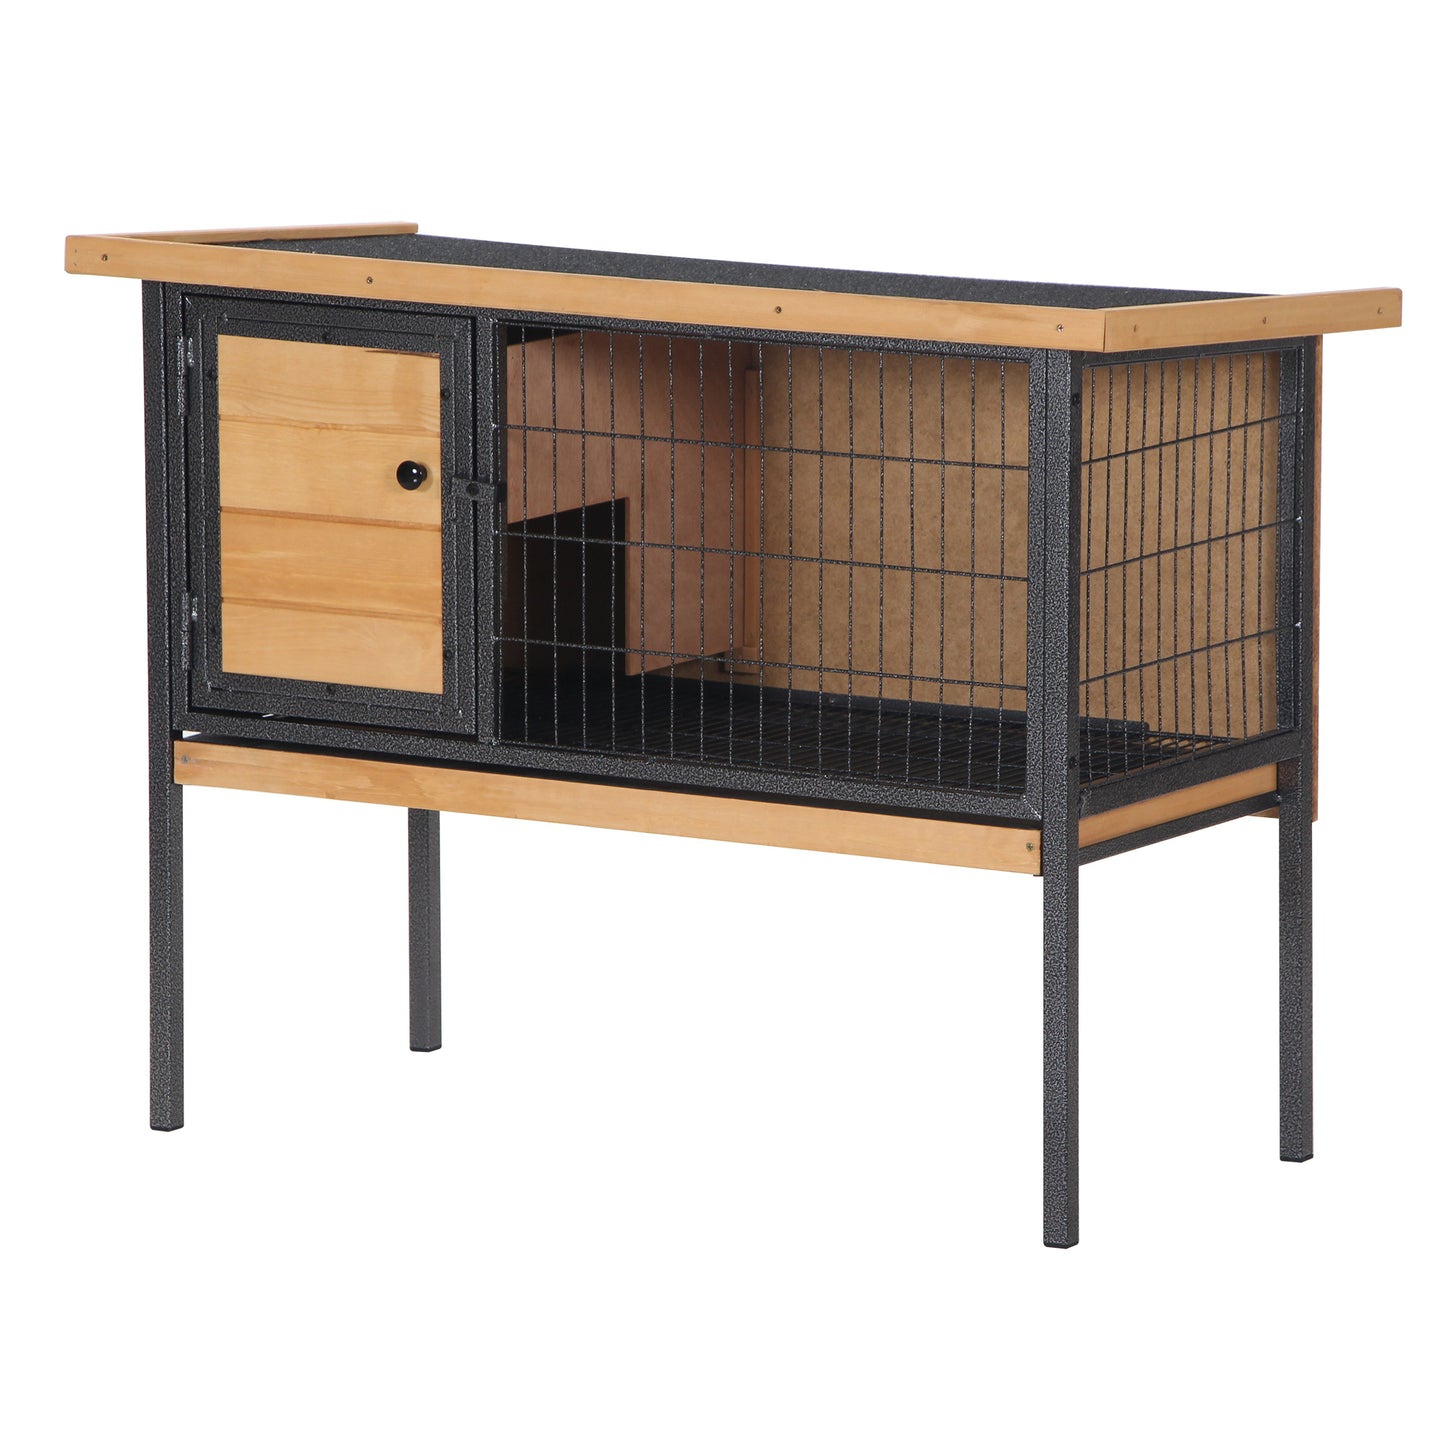 PawHut Wooden Rabbit Hutch Elevated Pet Cage with Slide-Out Tray Outdoor Natural